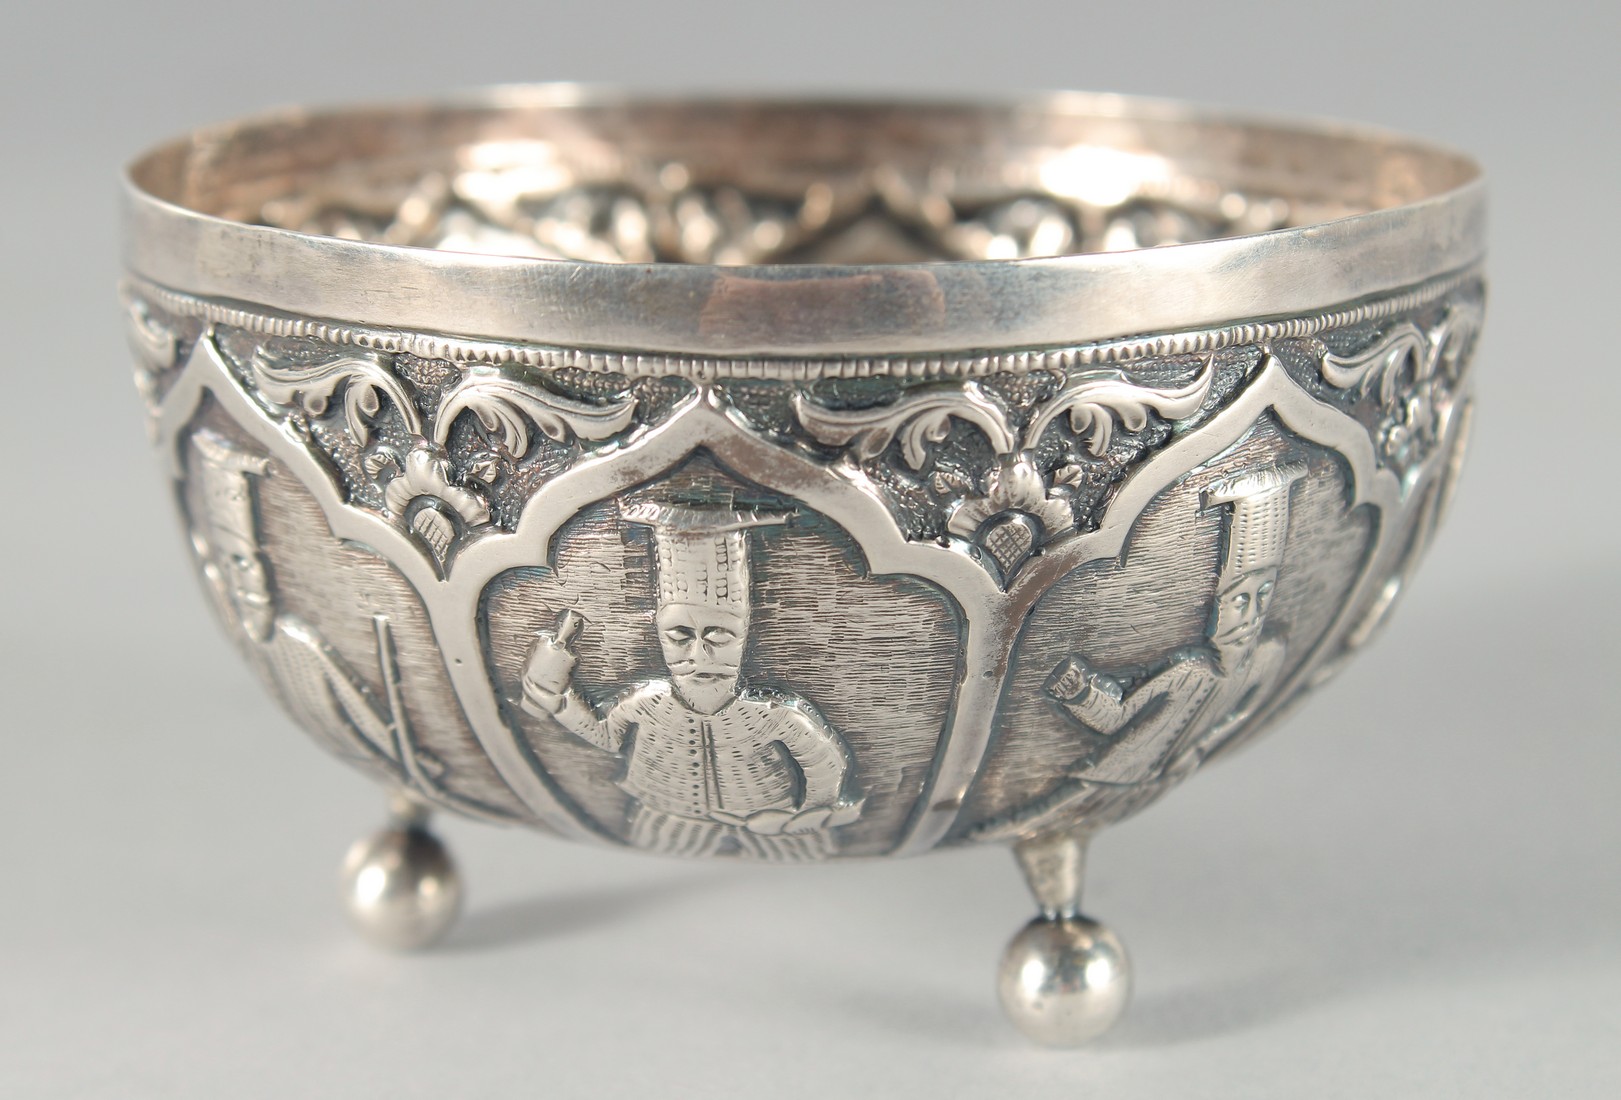 AN UNUSUAL 19TH CENTURY OTTOMAN GREEK OR ARMINIAN SILVER BOWL, with embossed and chased decoration - Image 2 of 5